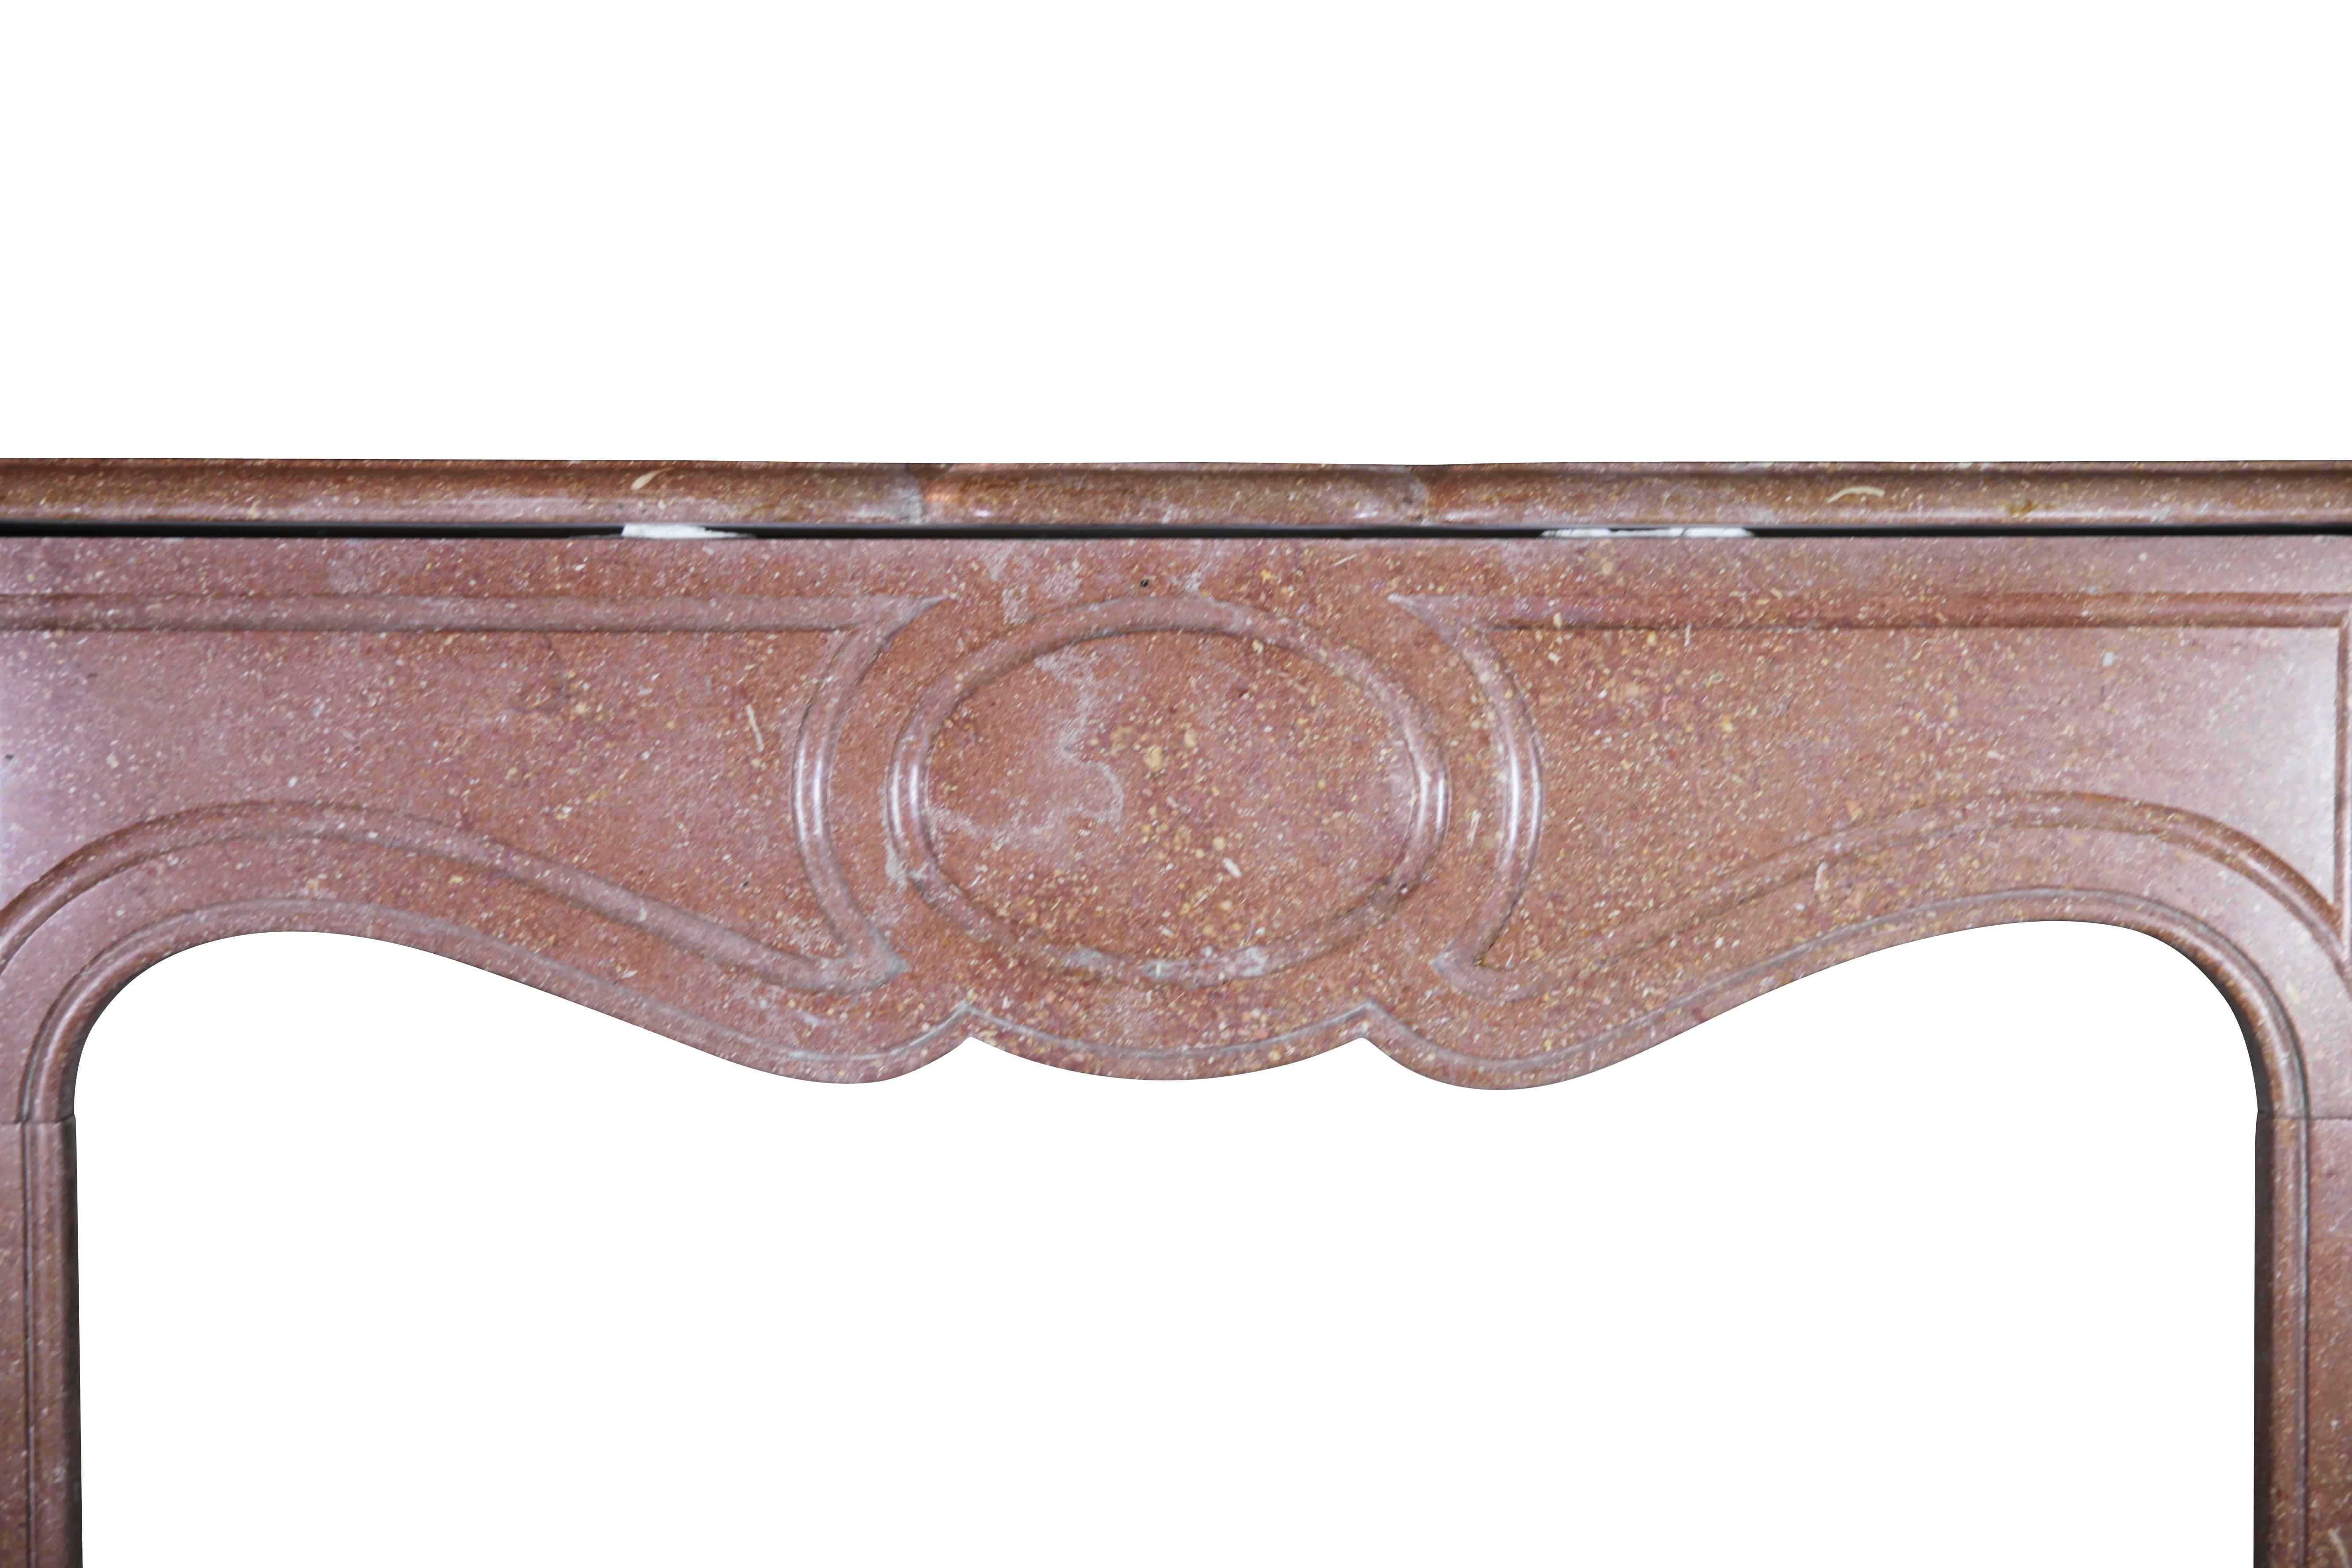 Polished 19th Century French Classic Petite Pompadour Marble Fireplace Surround For Sale